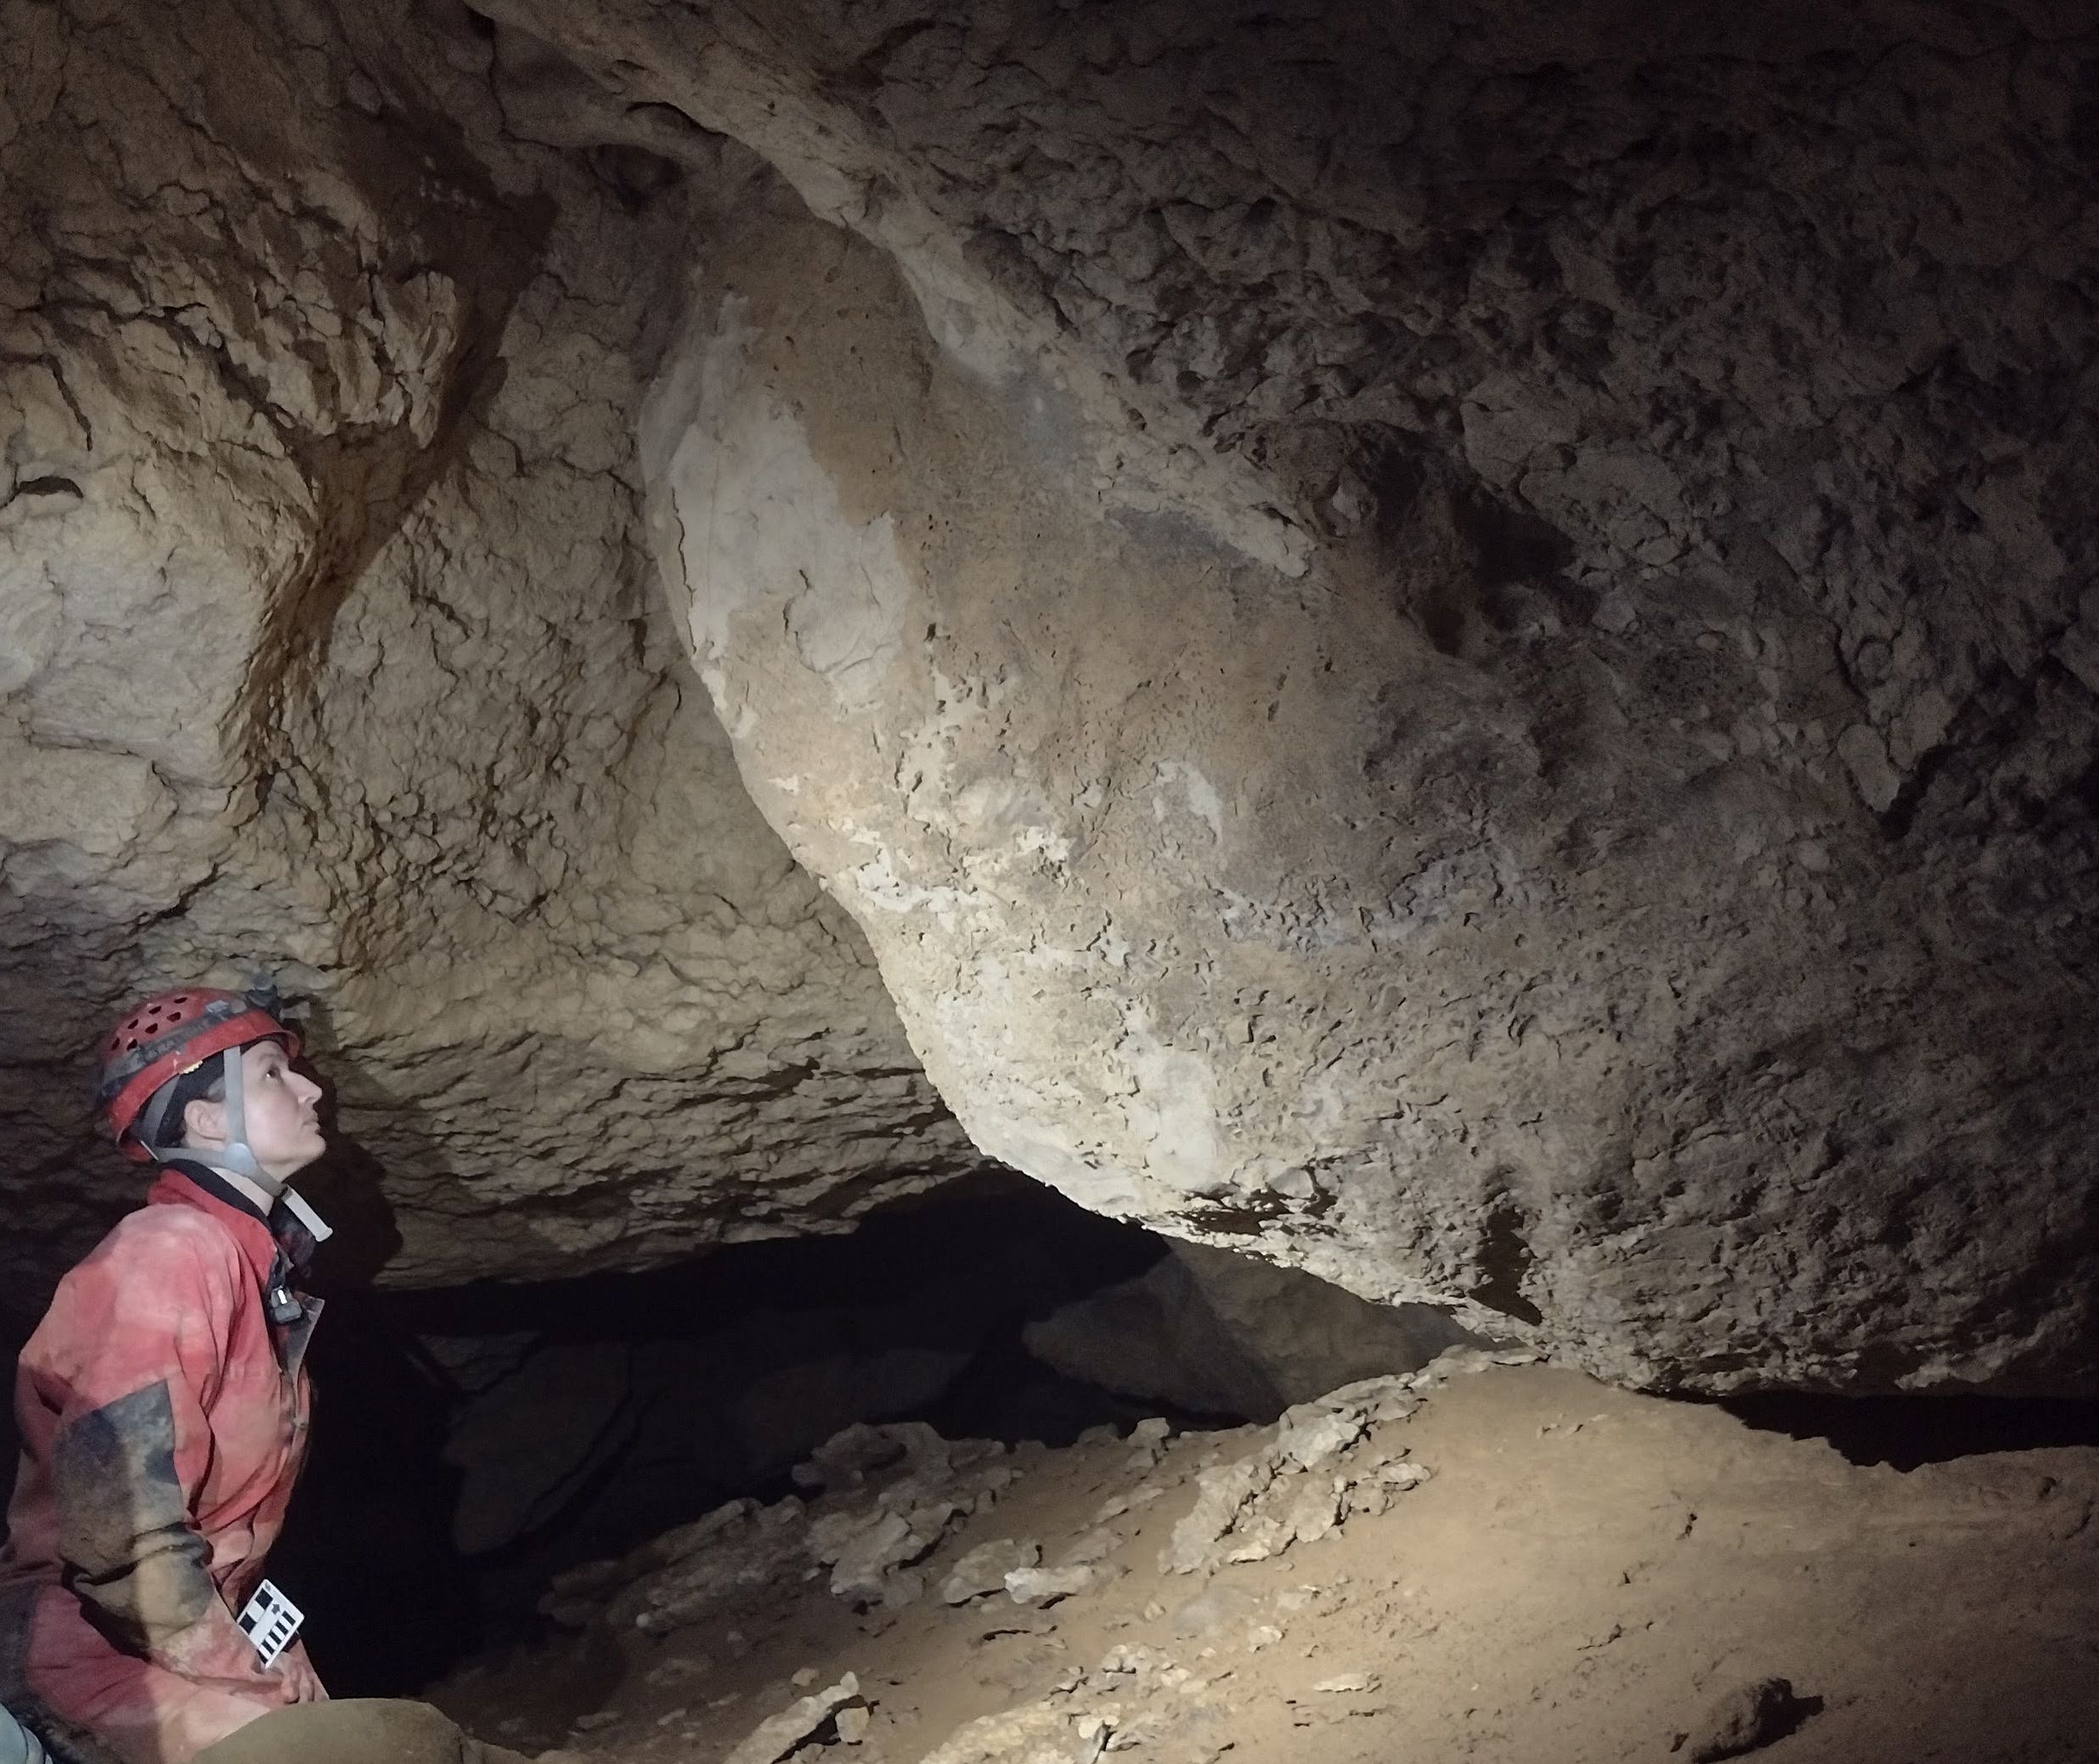 Dr. Gina Lukoczki examining a possible dolomitized paleokarst-fill in Spelungers Cave in the Edward Mountain Cave System.